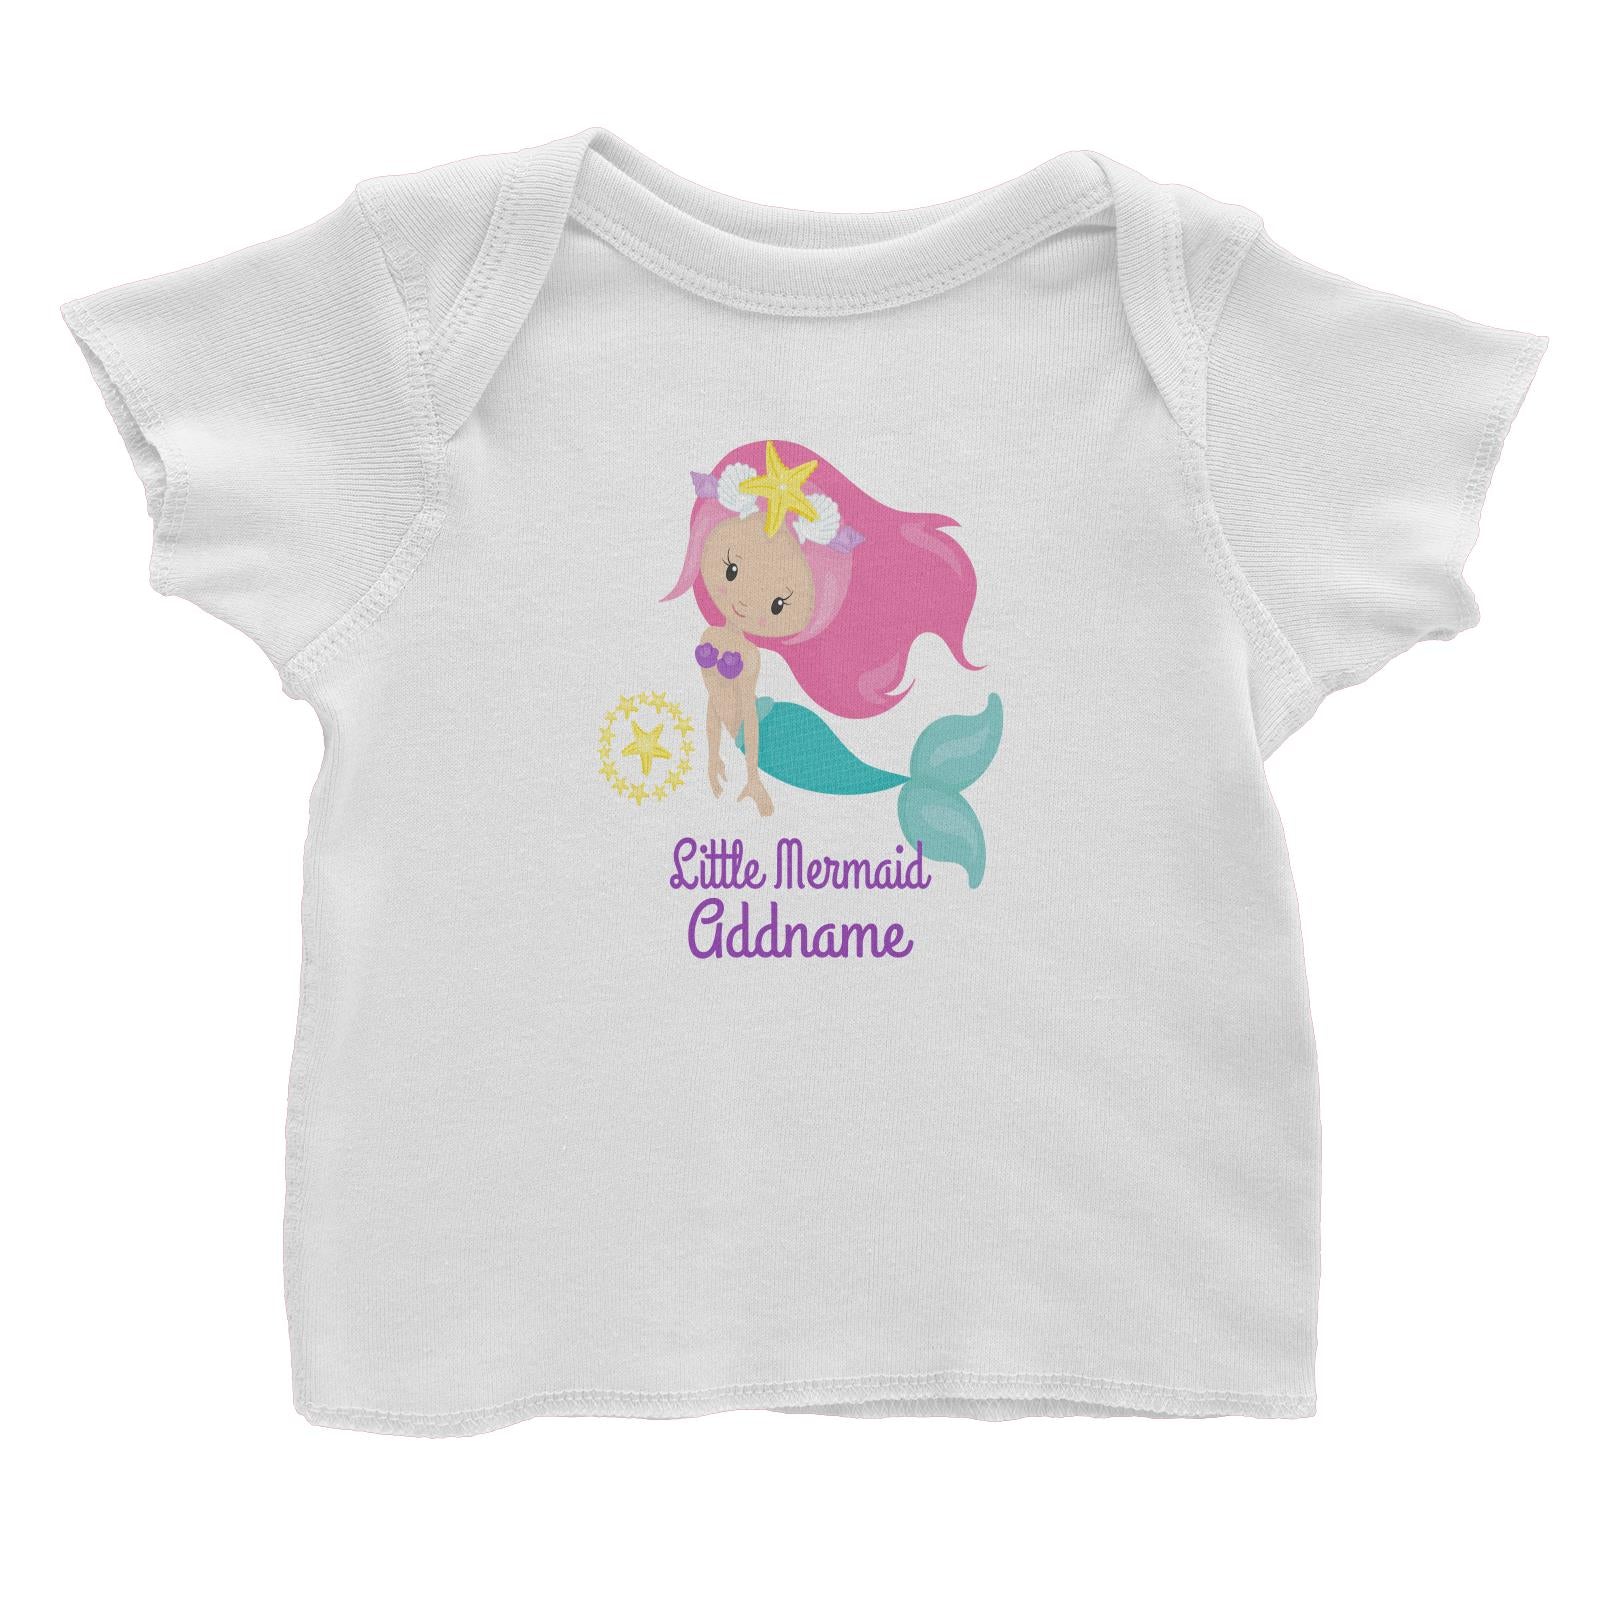 Little Mermaid Swimming with Starfish Emblem Addname Baby T-Shirt